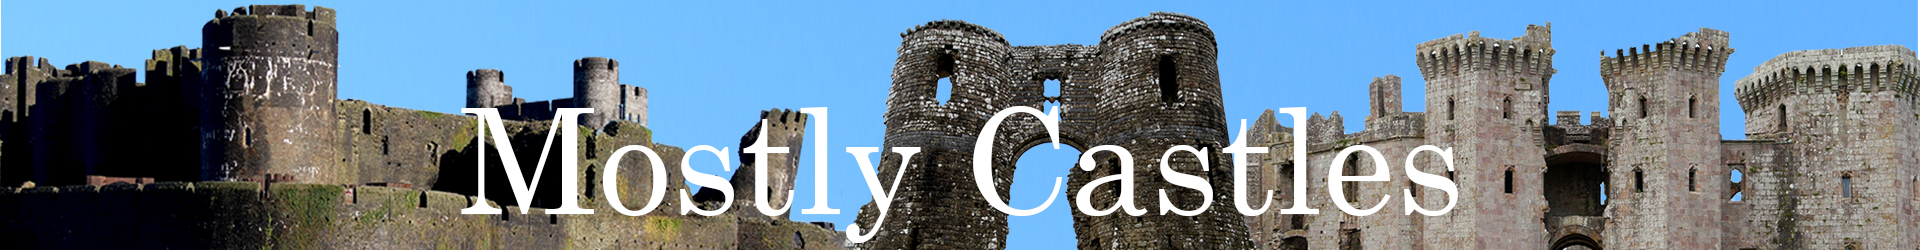 What’s in the Twin Towers of Cilgerran Castle?